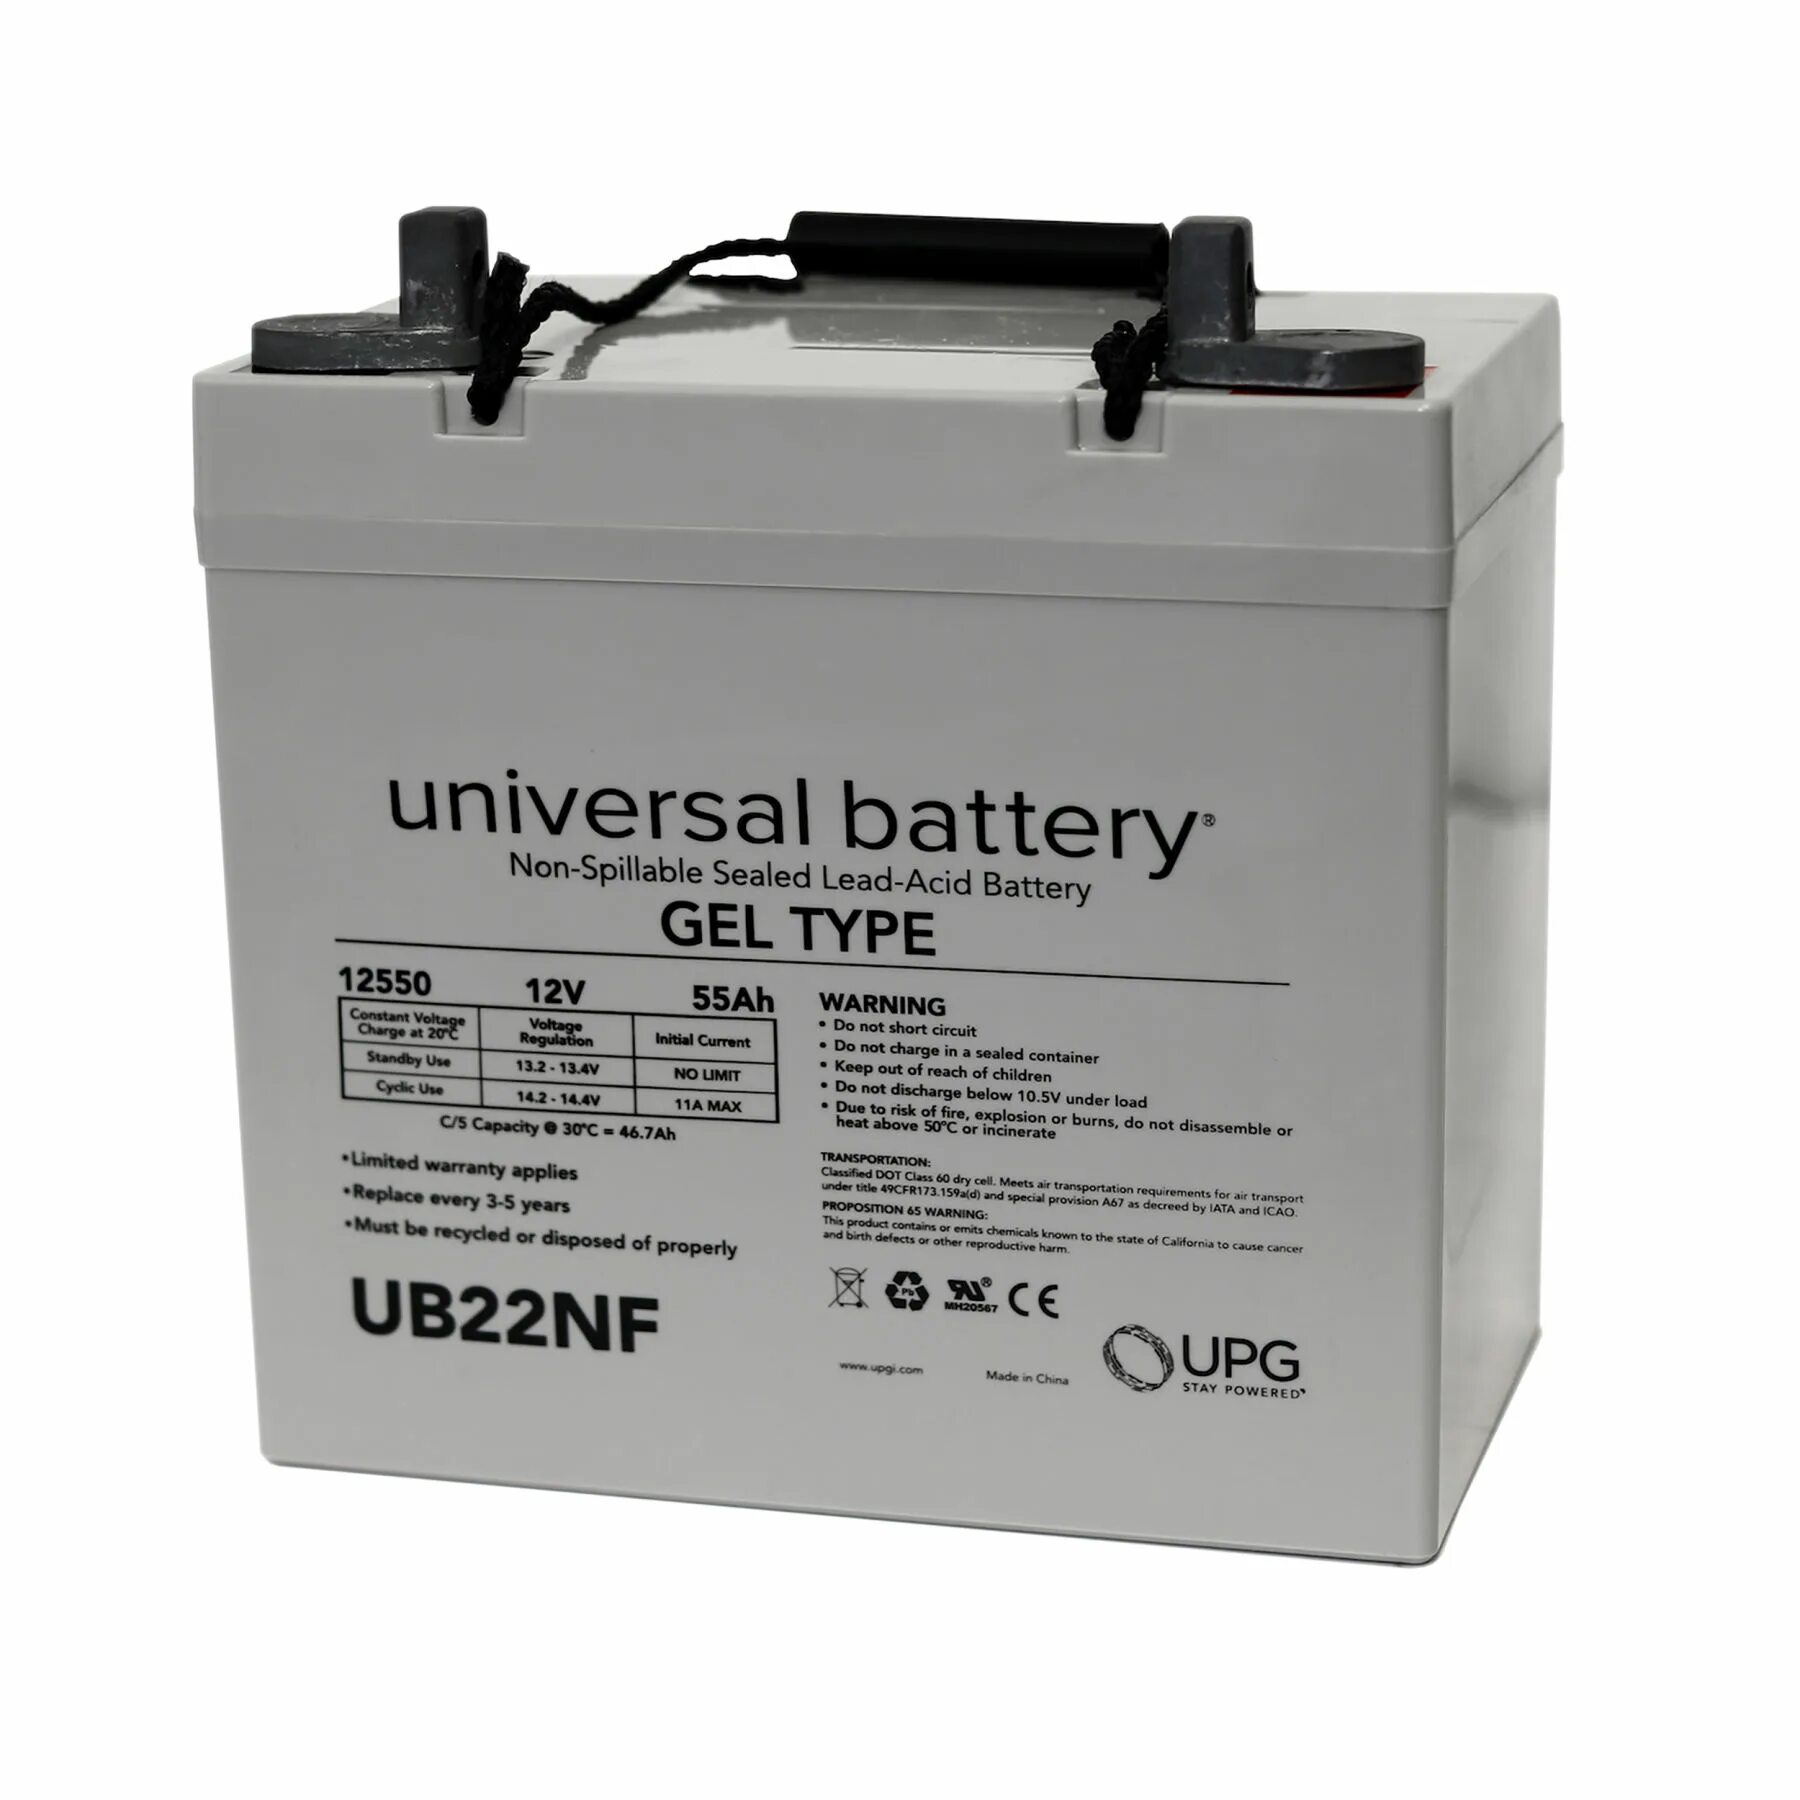 Gel battery. 12v 75ah Sealed lead acid Battery. Battery: Sealed non Spillable 120ah Philidas. Battery- 55 Ah/850ca. Non-Spillable аккумулятор.